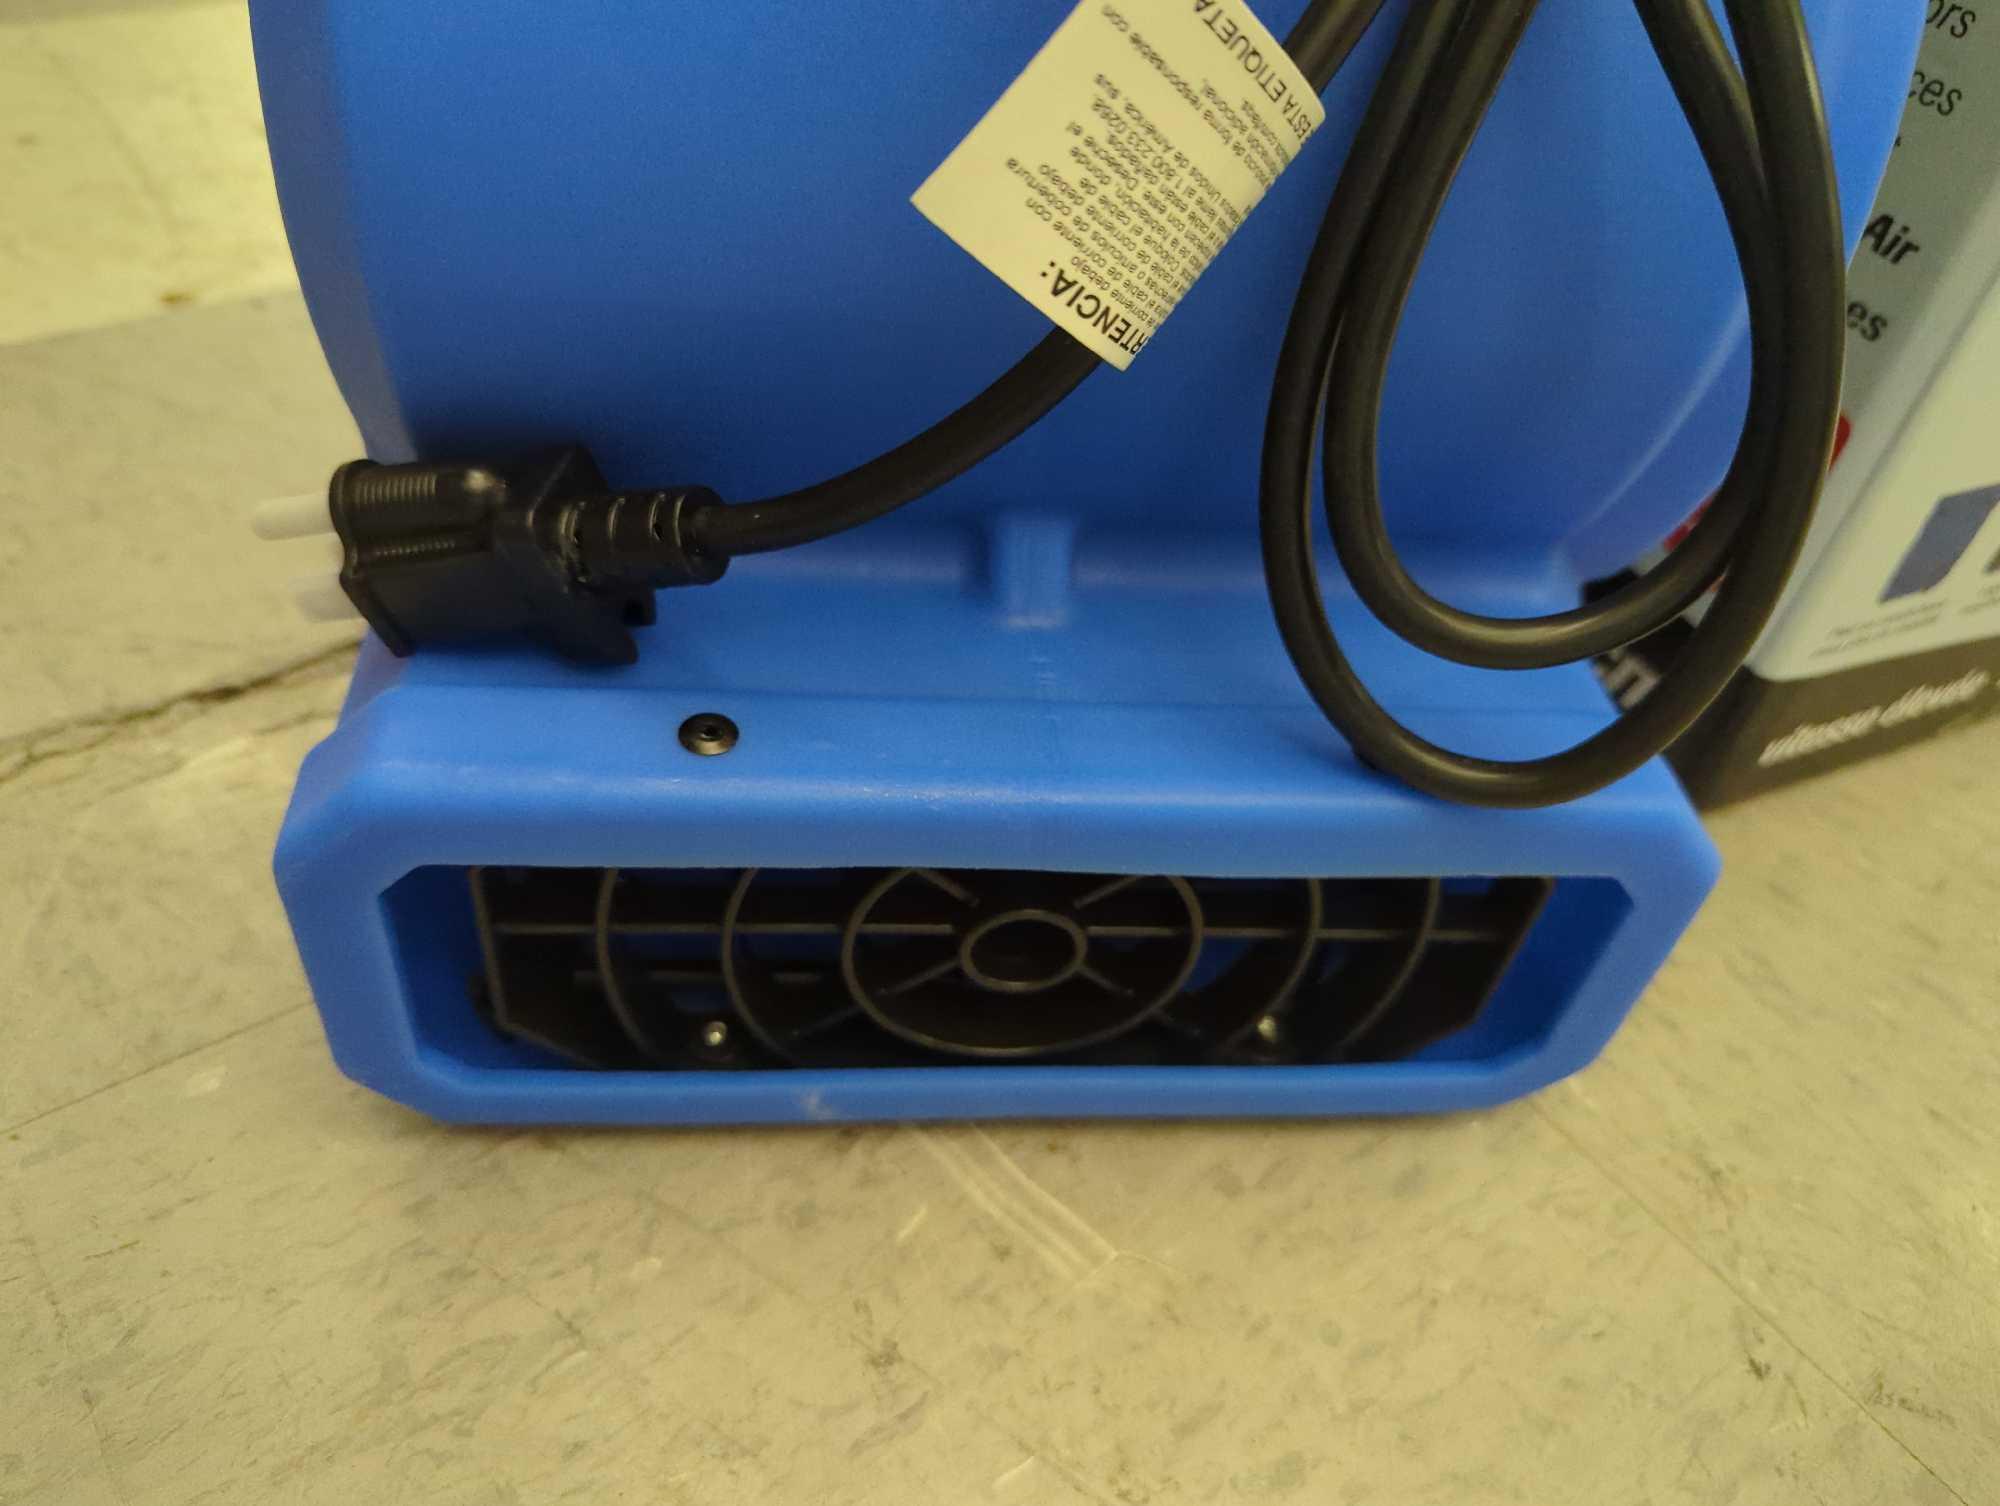 B-Air 1/8 HP Air Mover Carpet Dryer Floor Blower Fan for Home Use in Blue, Appears to be New in